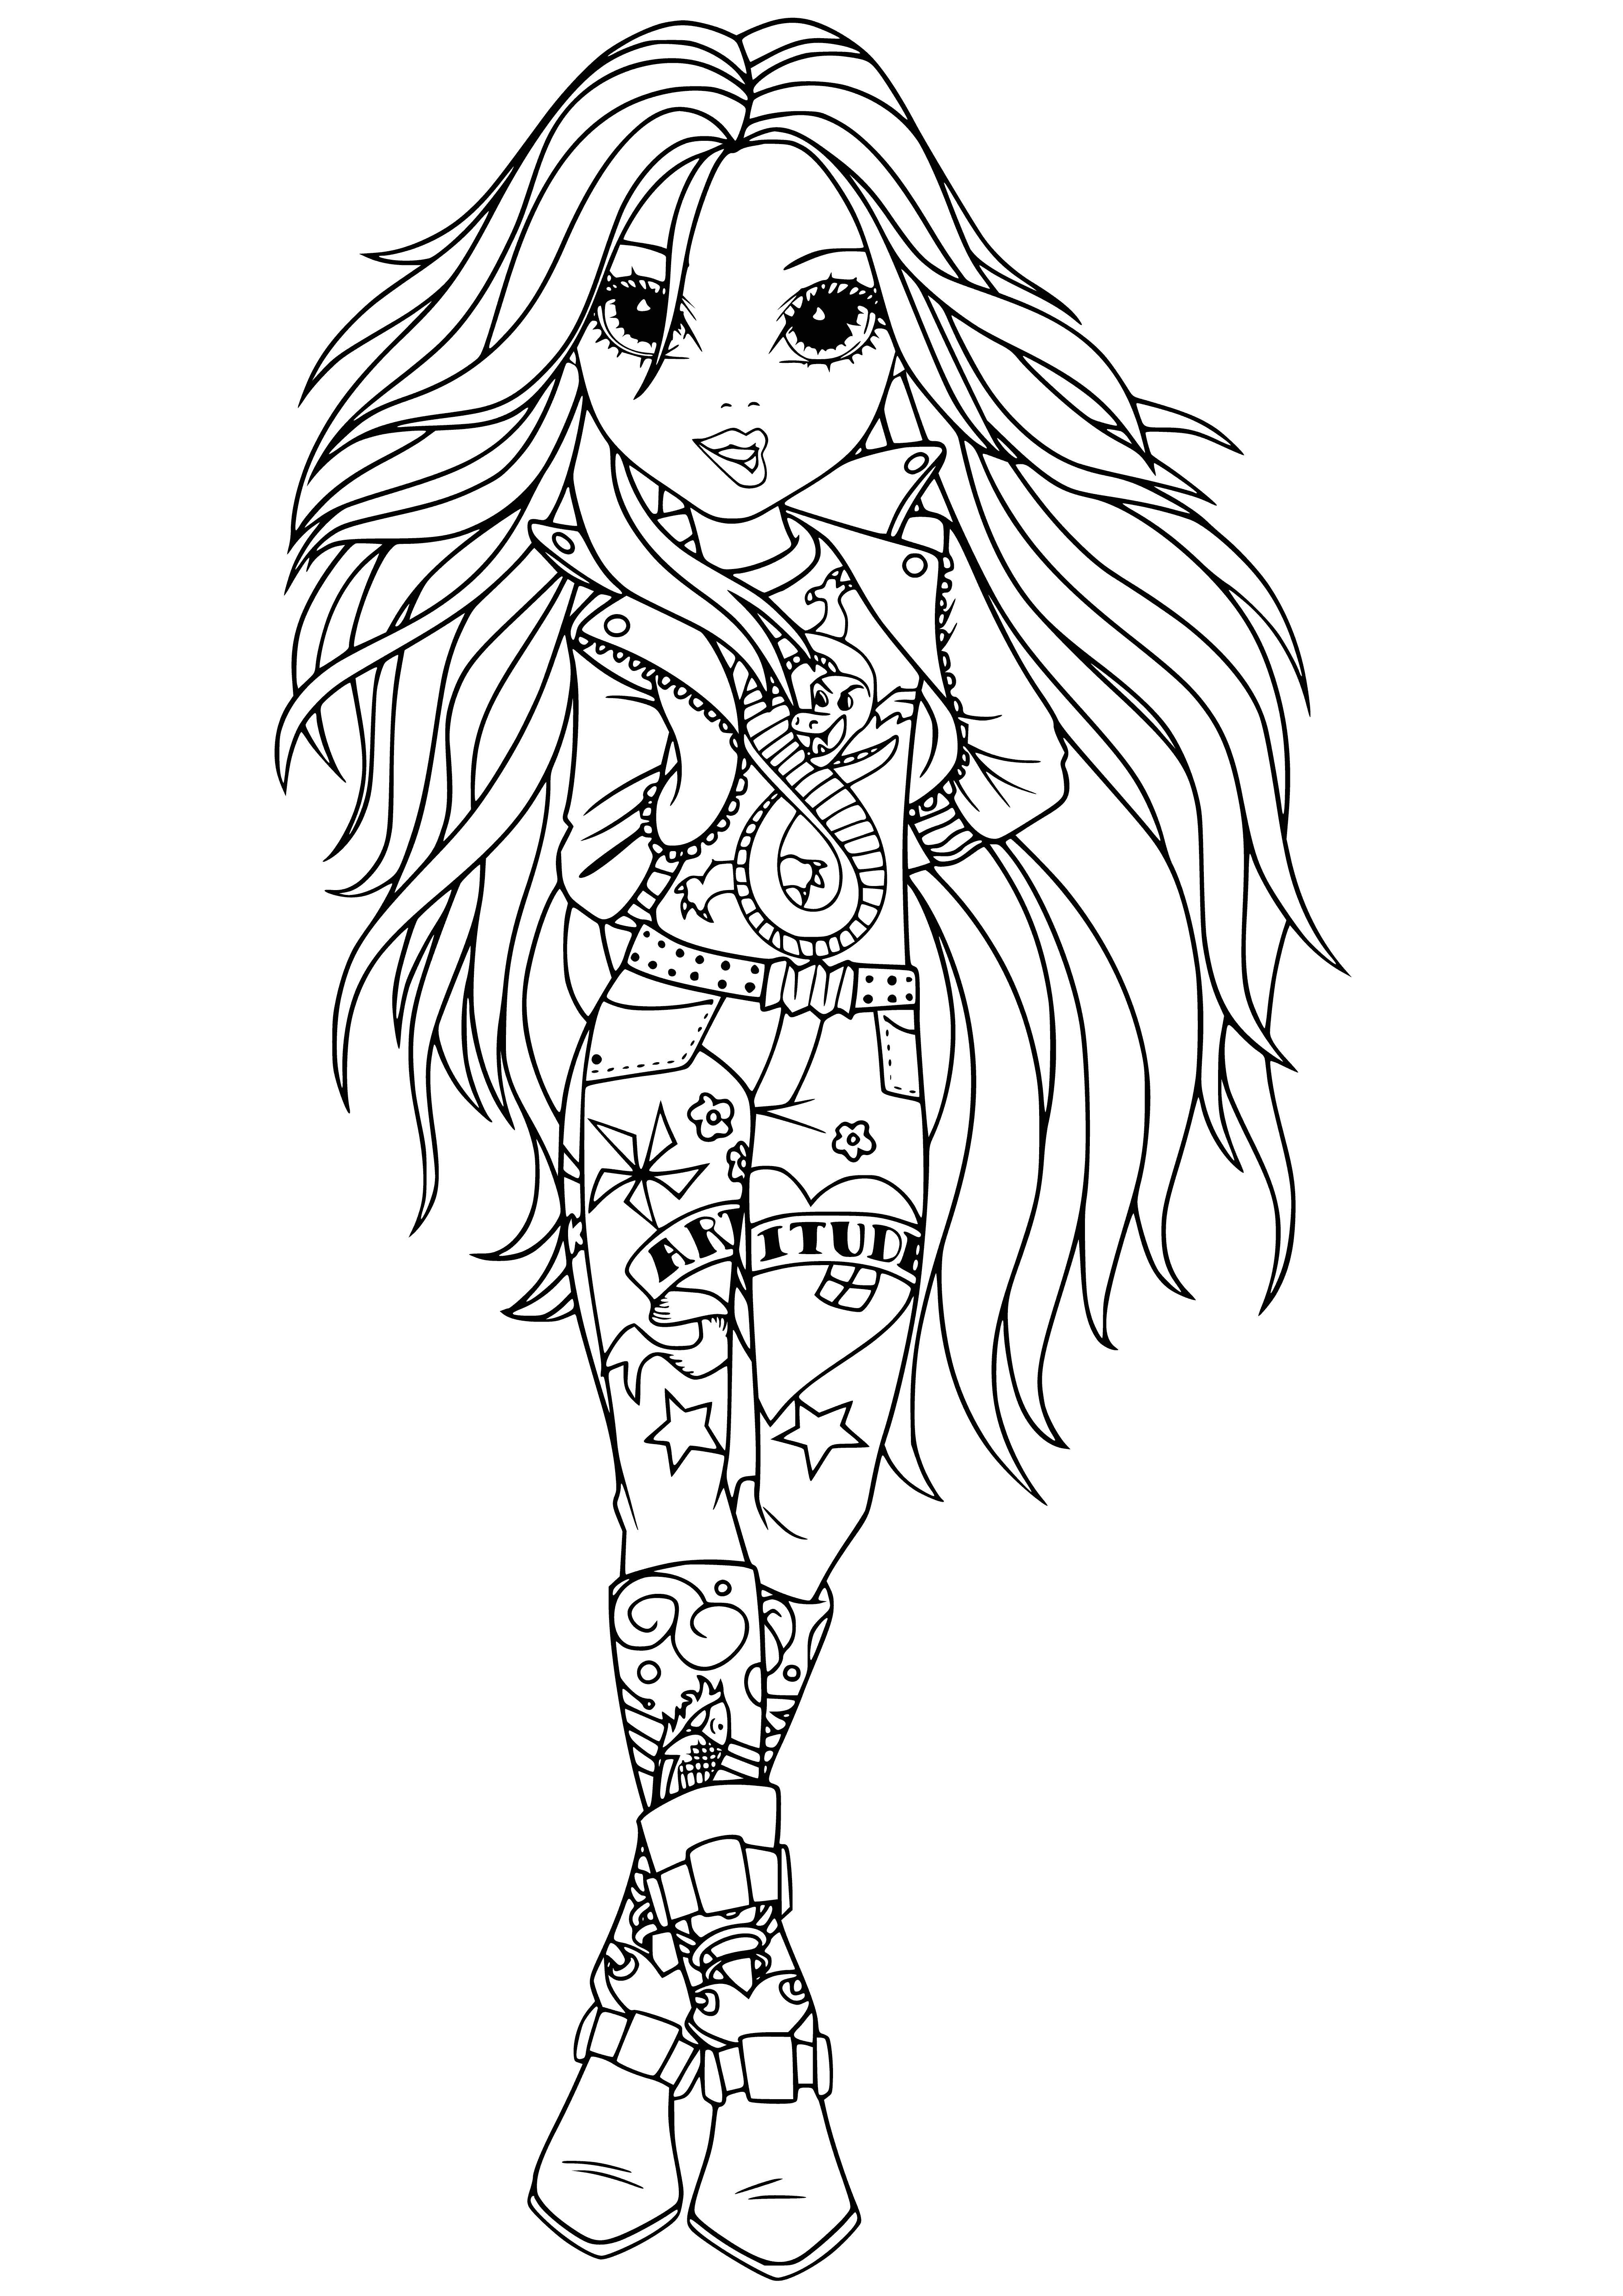 coloring page: A girl stands w/long dark hair & tan skin; she's wearing purple & jean shorts, holding a small white dog in her right hand.